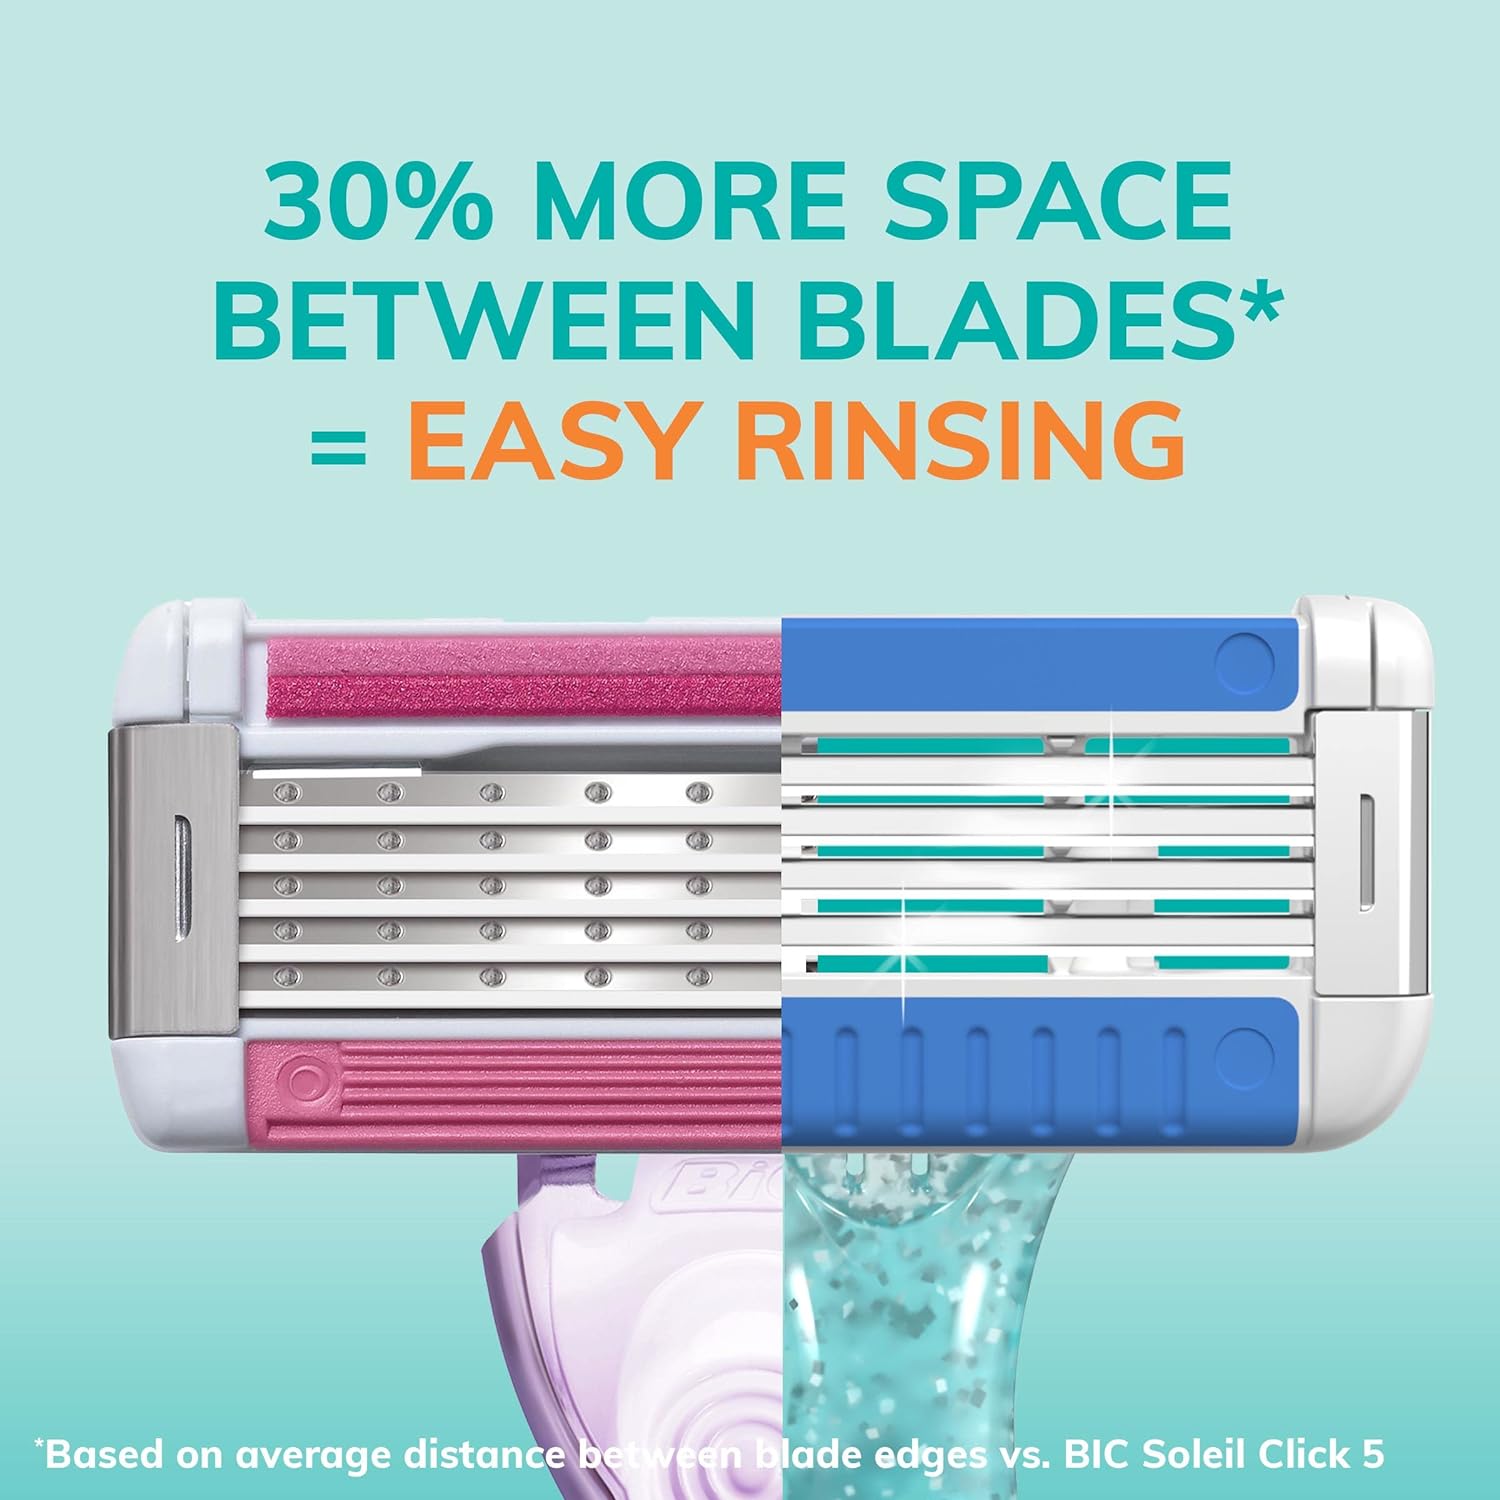 BIC EasyRinse Anti-Clogging Women's Disposable Razors for a Smoother Shave With Less Irritation*, Easy Rinse Shaving Razors With 4 Blades, 2 Count : Beauty & Personal Care